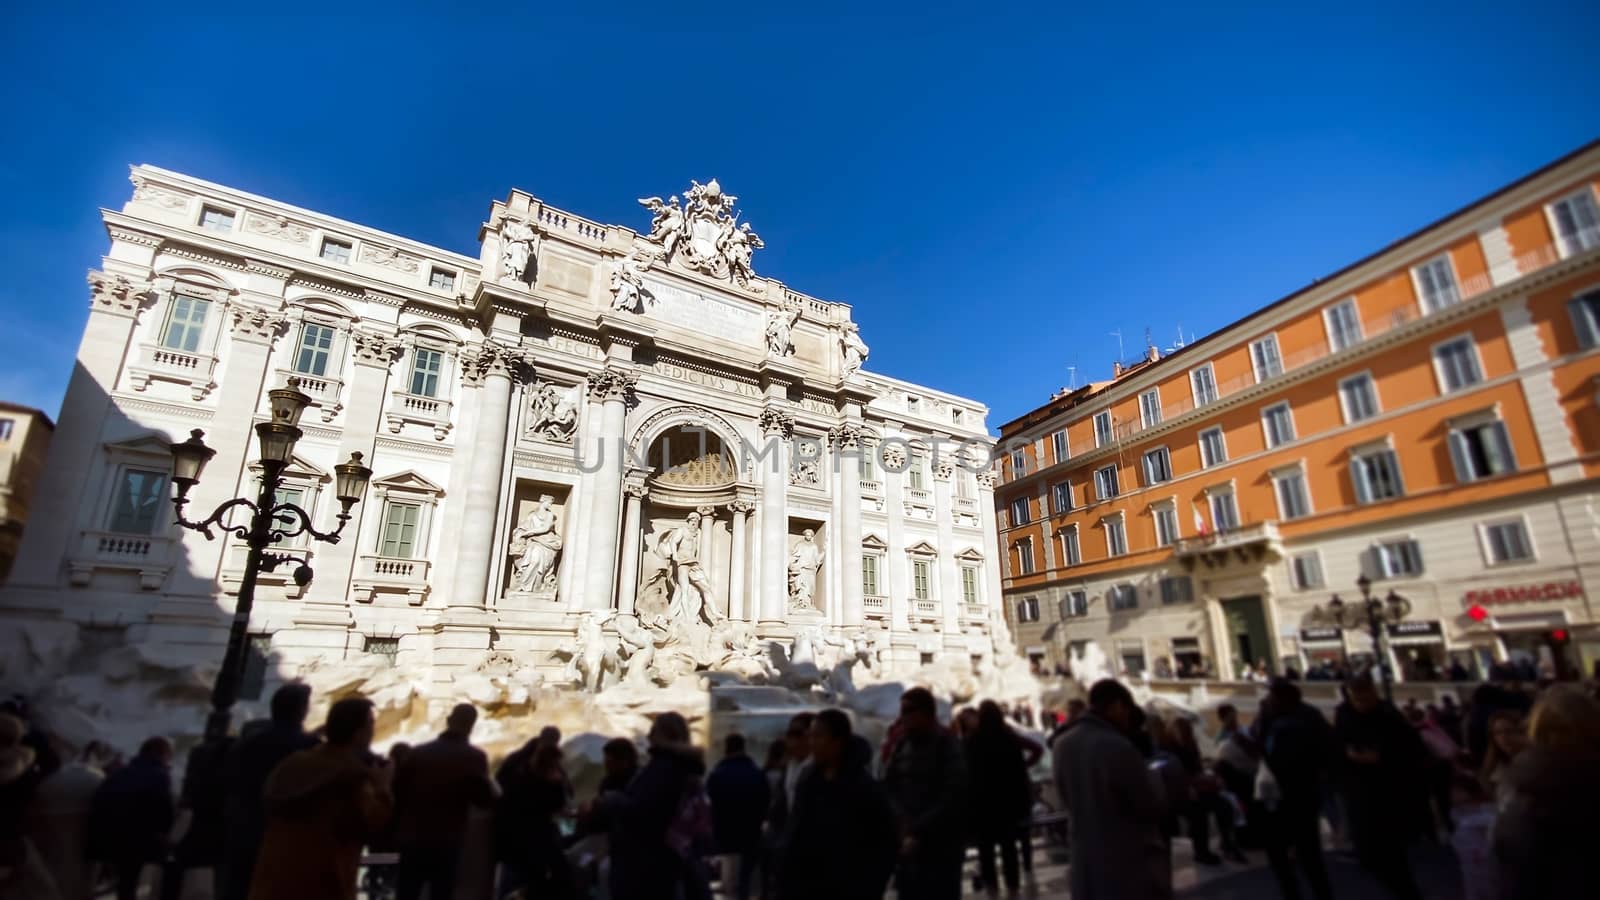 The marble facade of the Trevi Fountain illuminated by the sun with tourists walking on a sunny winter day in Rome.